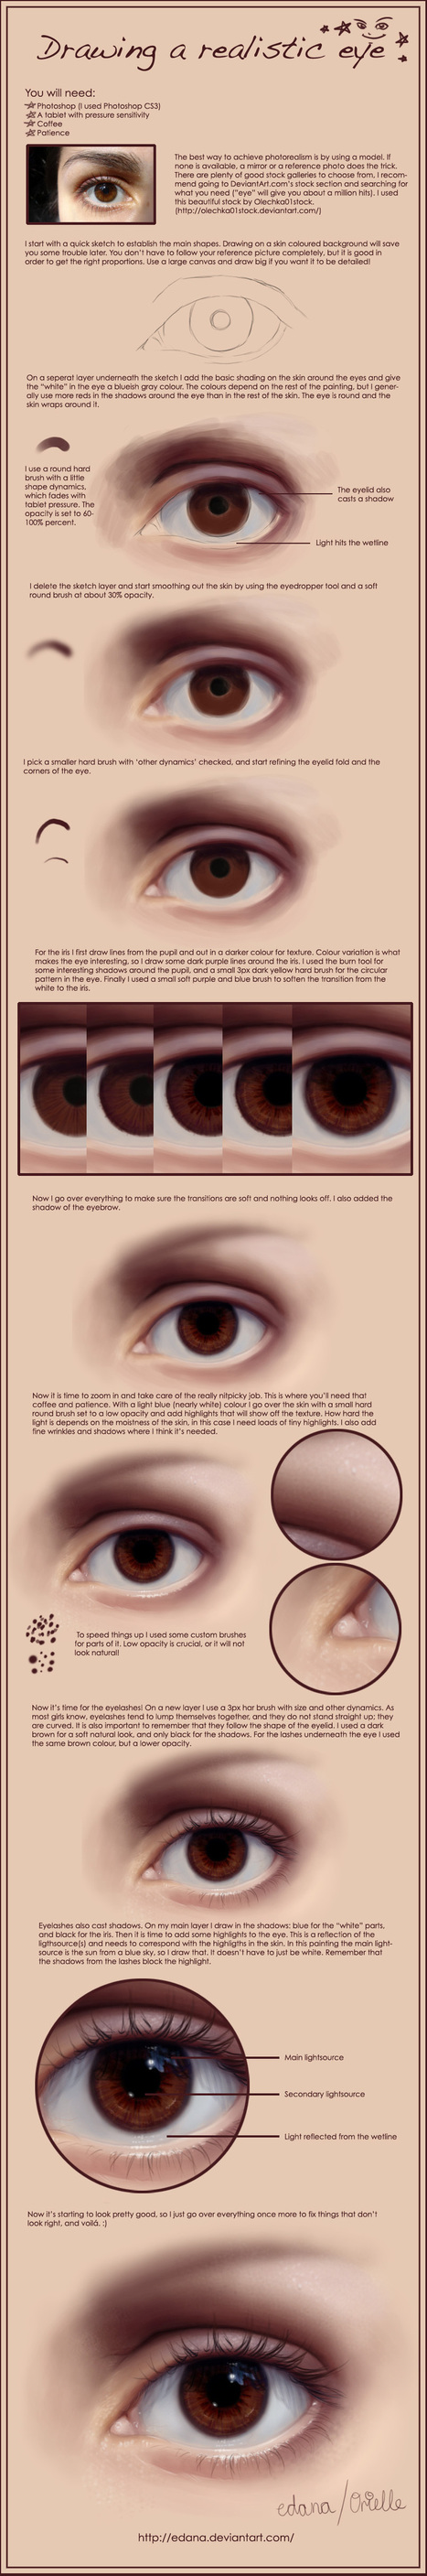 Drawing a realistic eye | Drawing References and Resources | Scoop.it